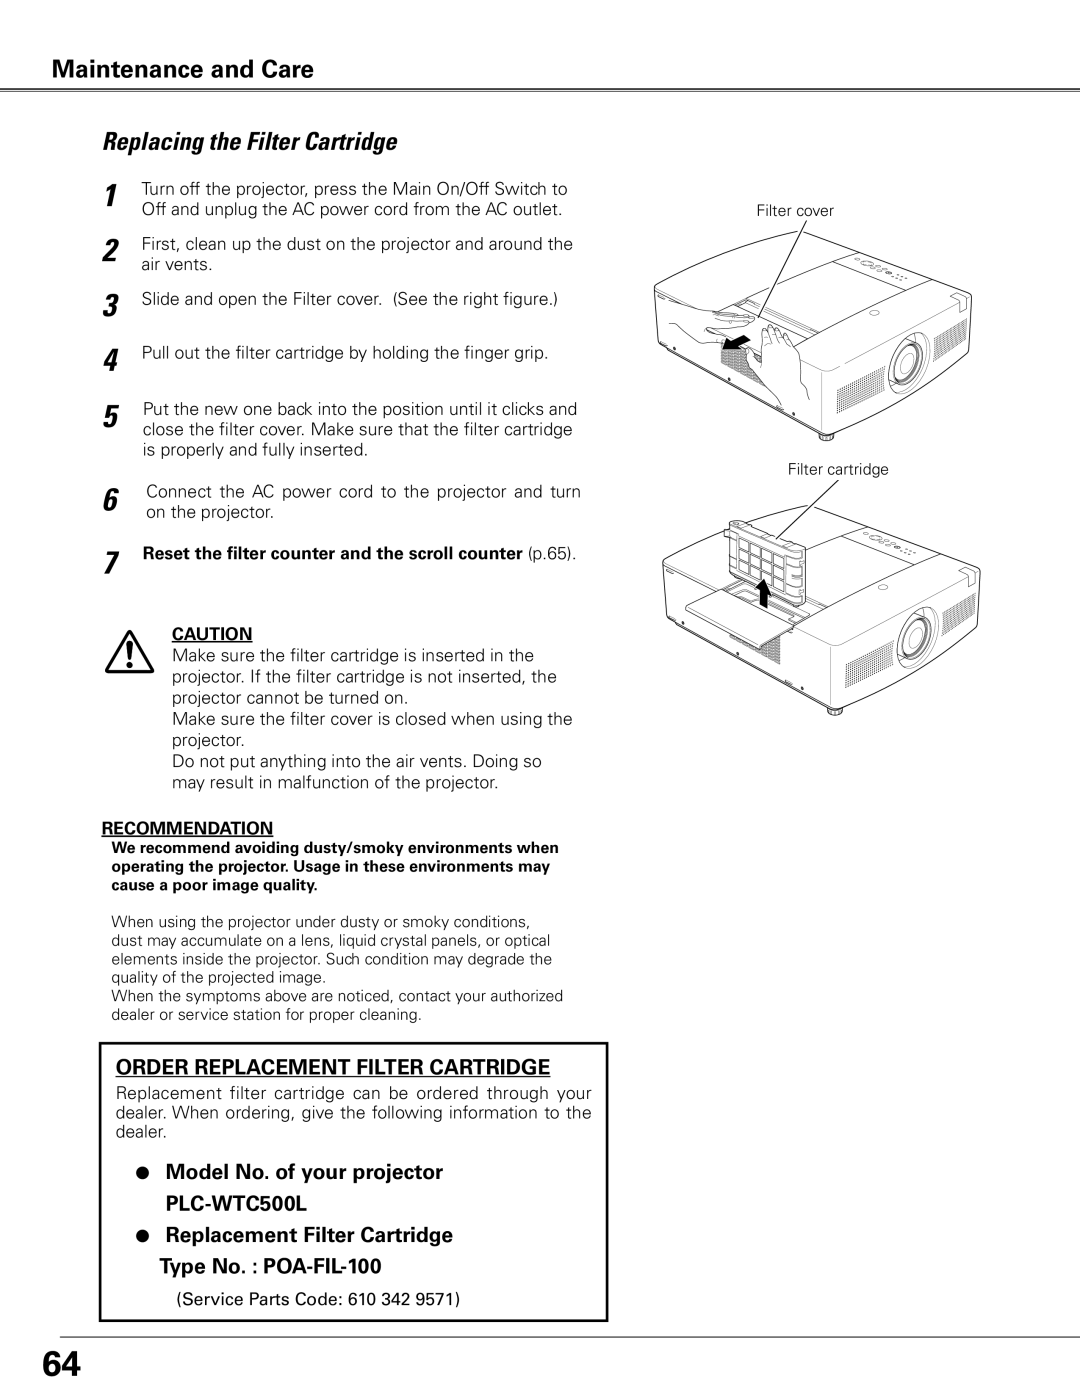 Sanyo WTC500L owner manual 1 2 3 4 5, Maintenance and Care, Replacing the Filter Cartridge 